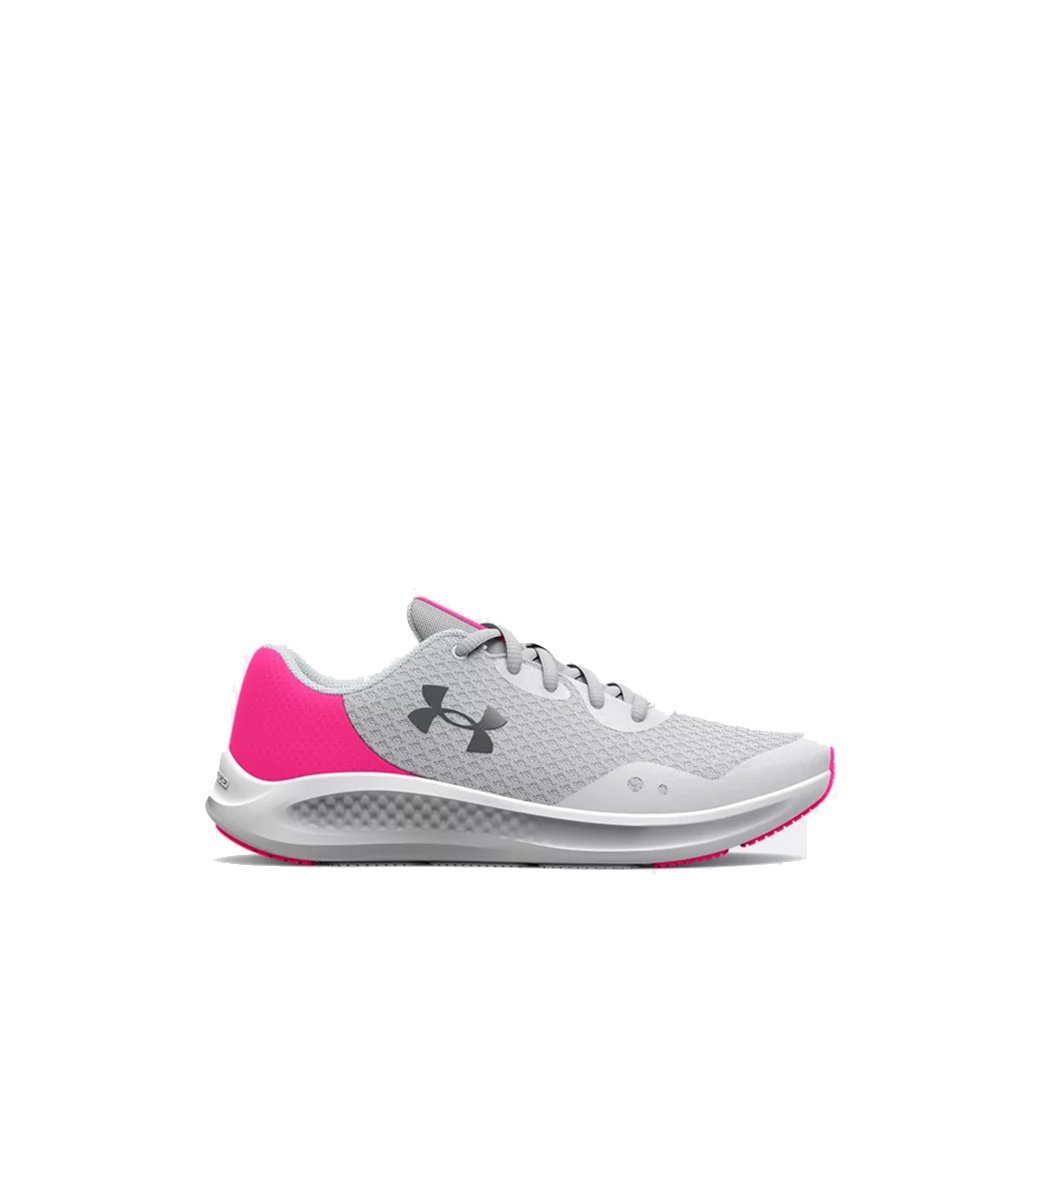 Under Armour Charged Pursuit 3 Halo Grey / Electro Pink |Tony Pappas